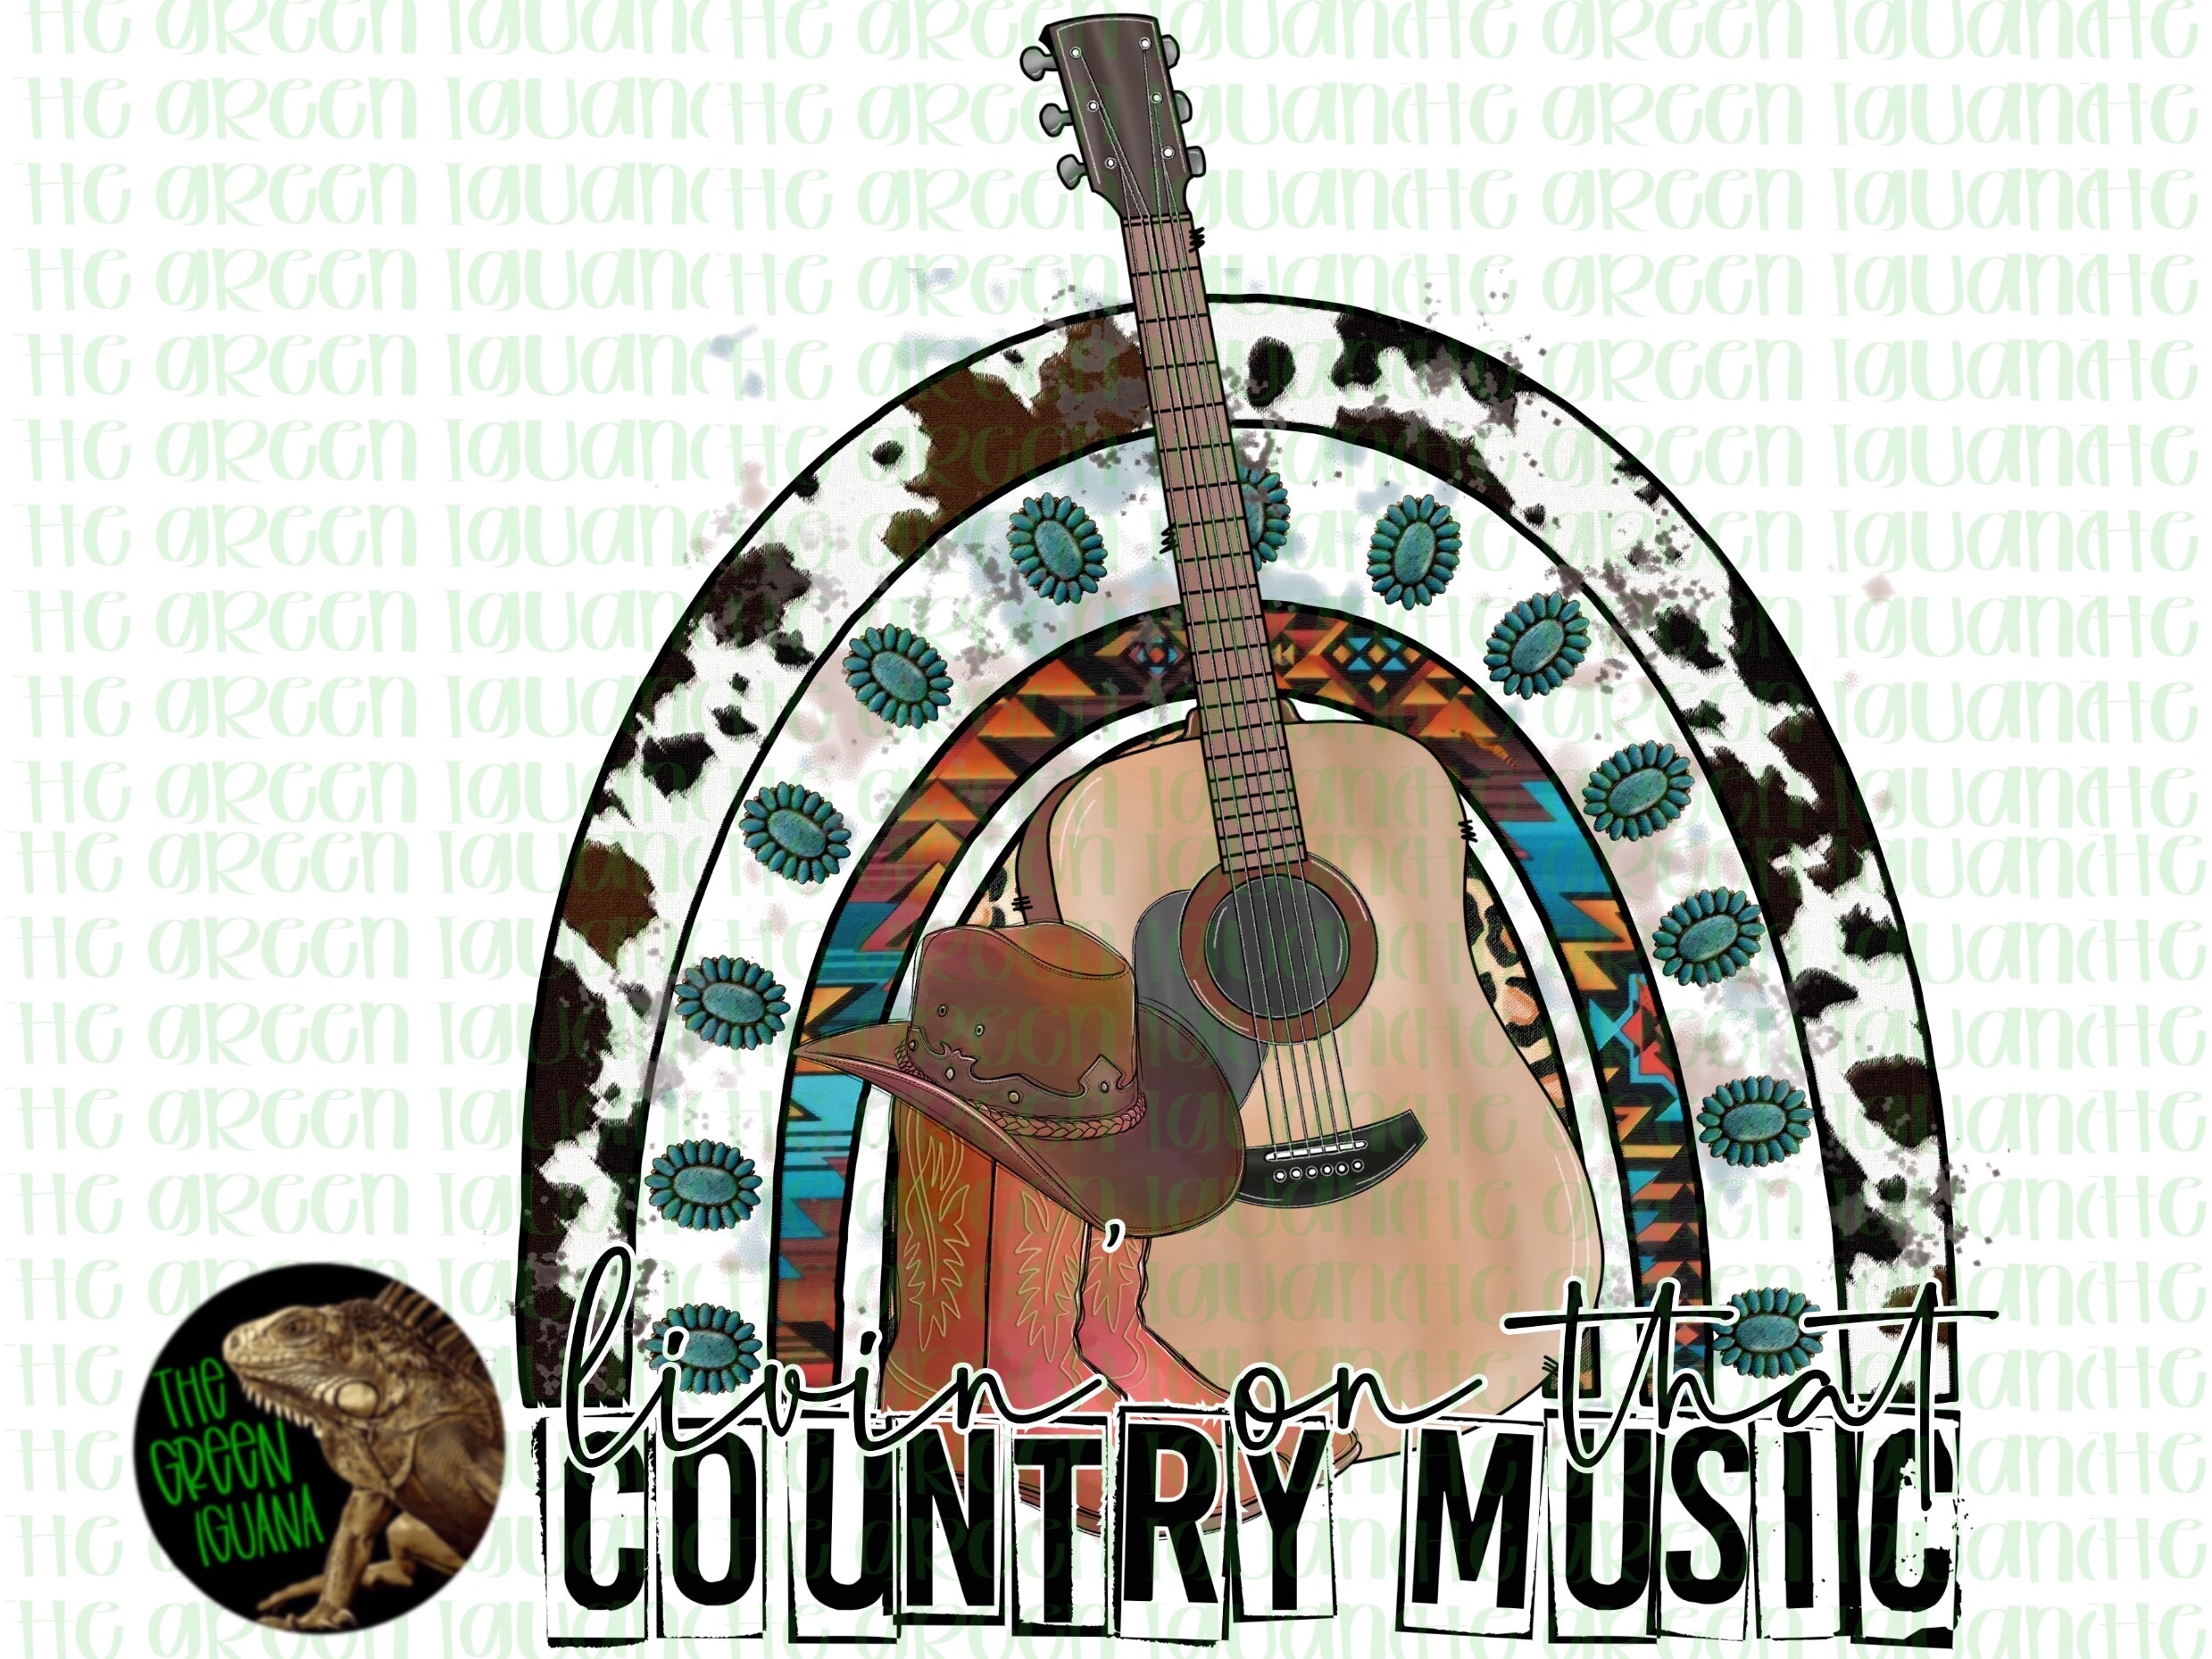 Livin’ on that country music - DIGITAL